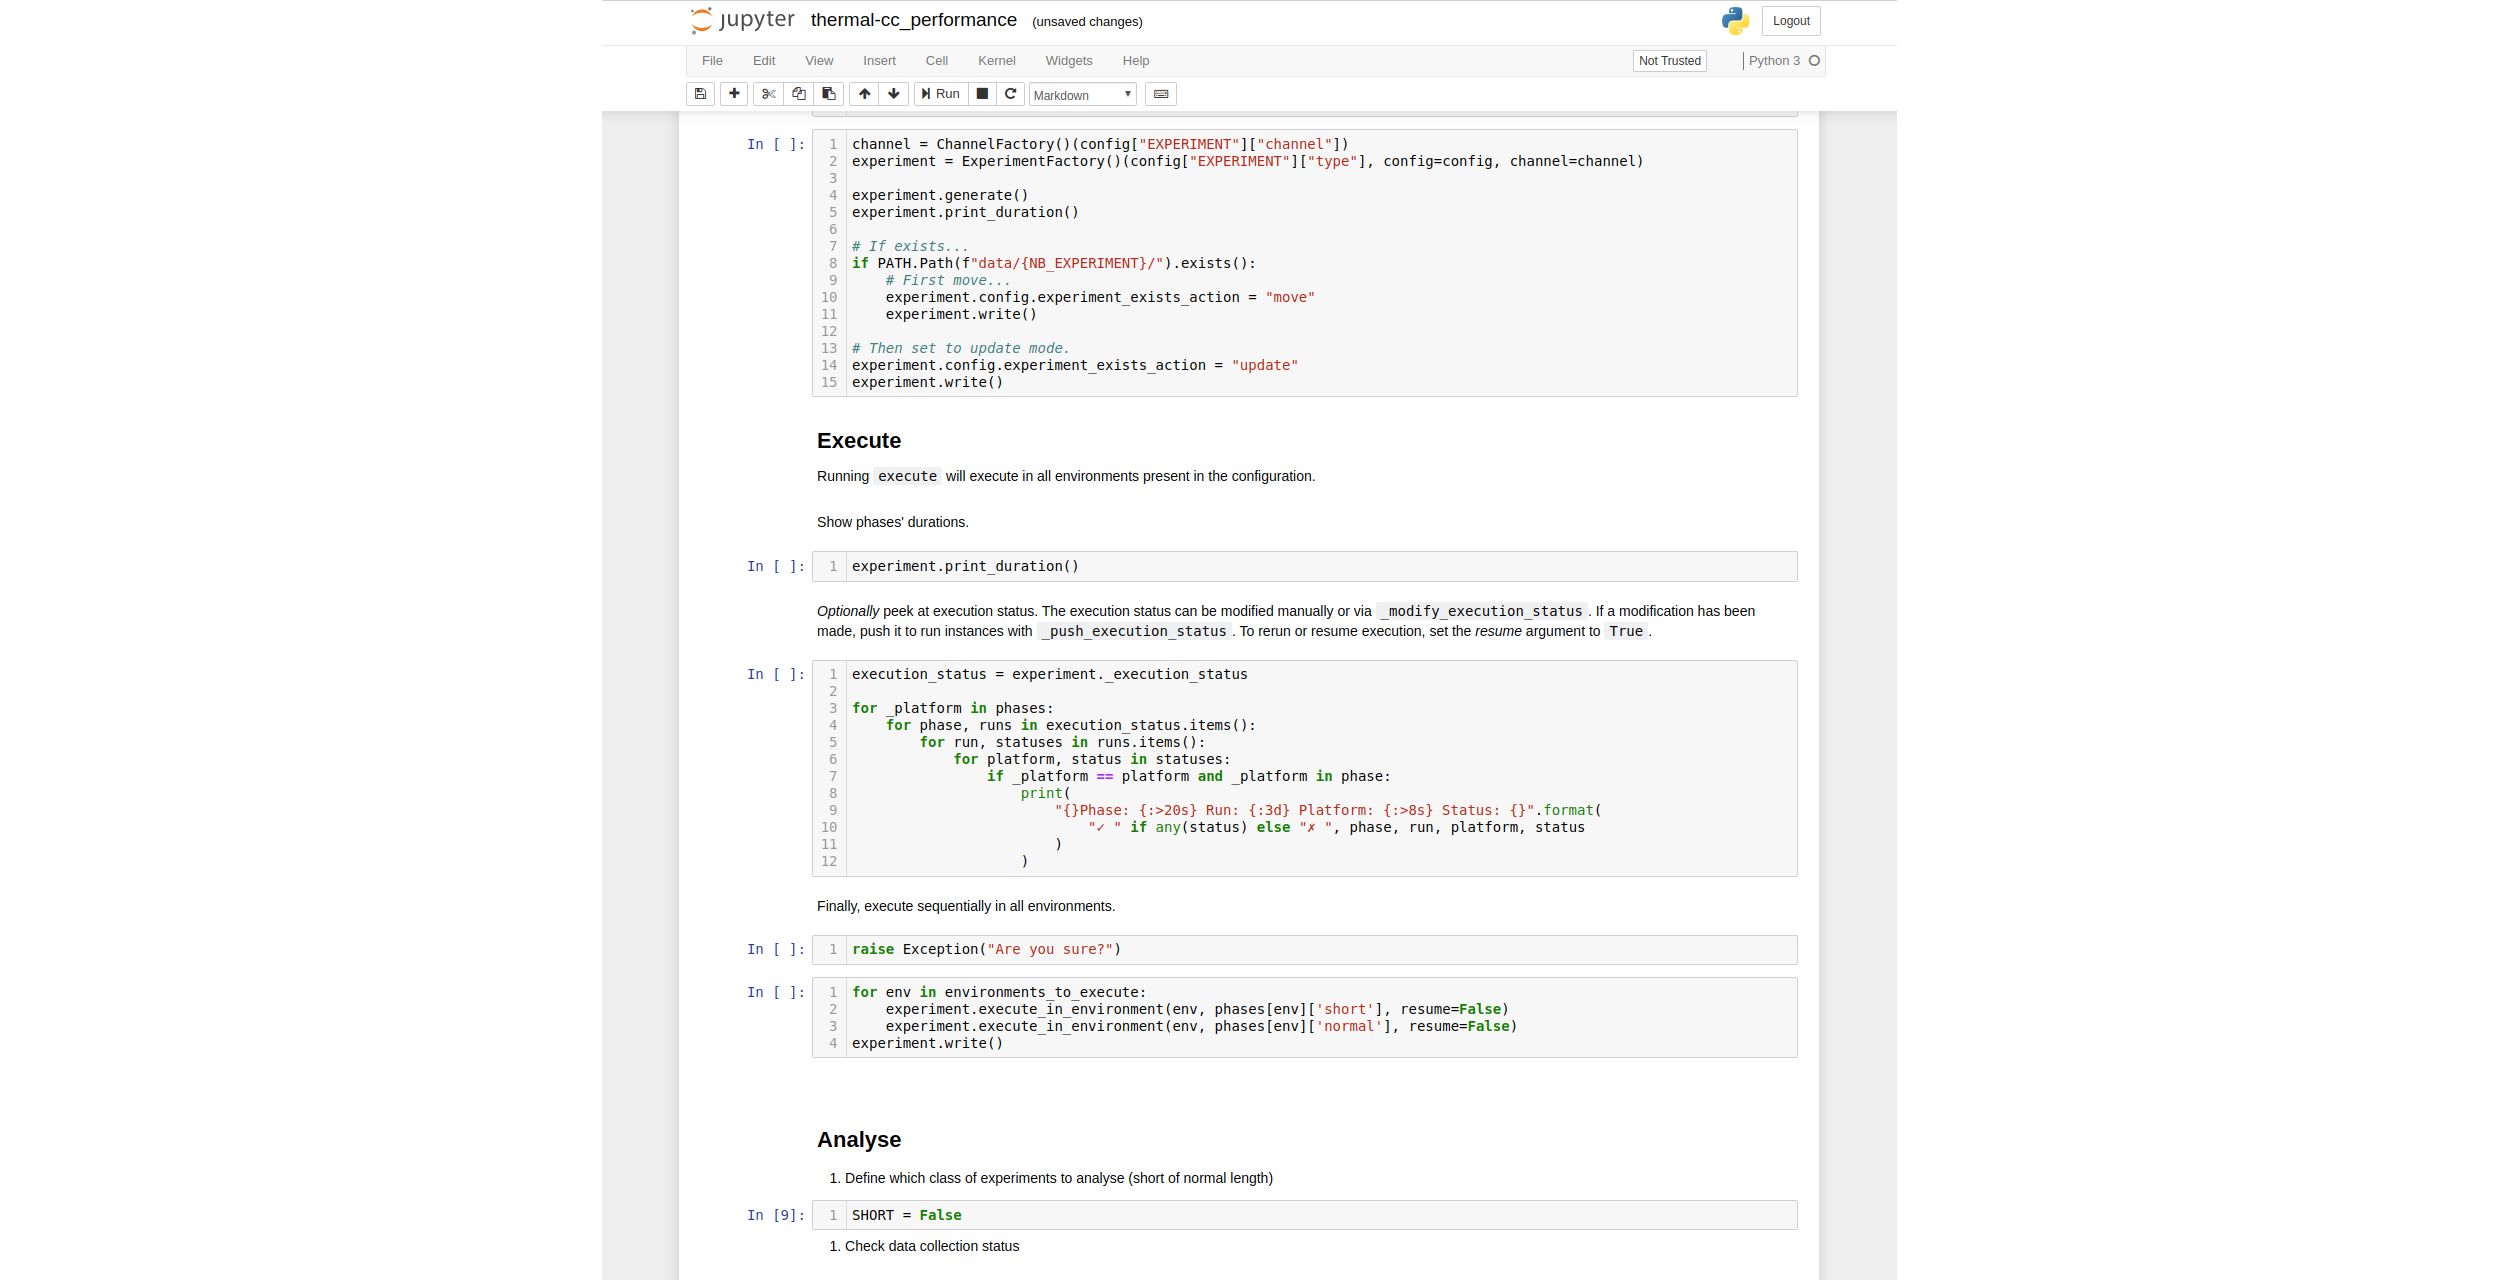 Experiment generation, execution and analysis in one jupyter notebook using ExOT